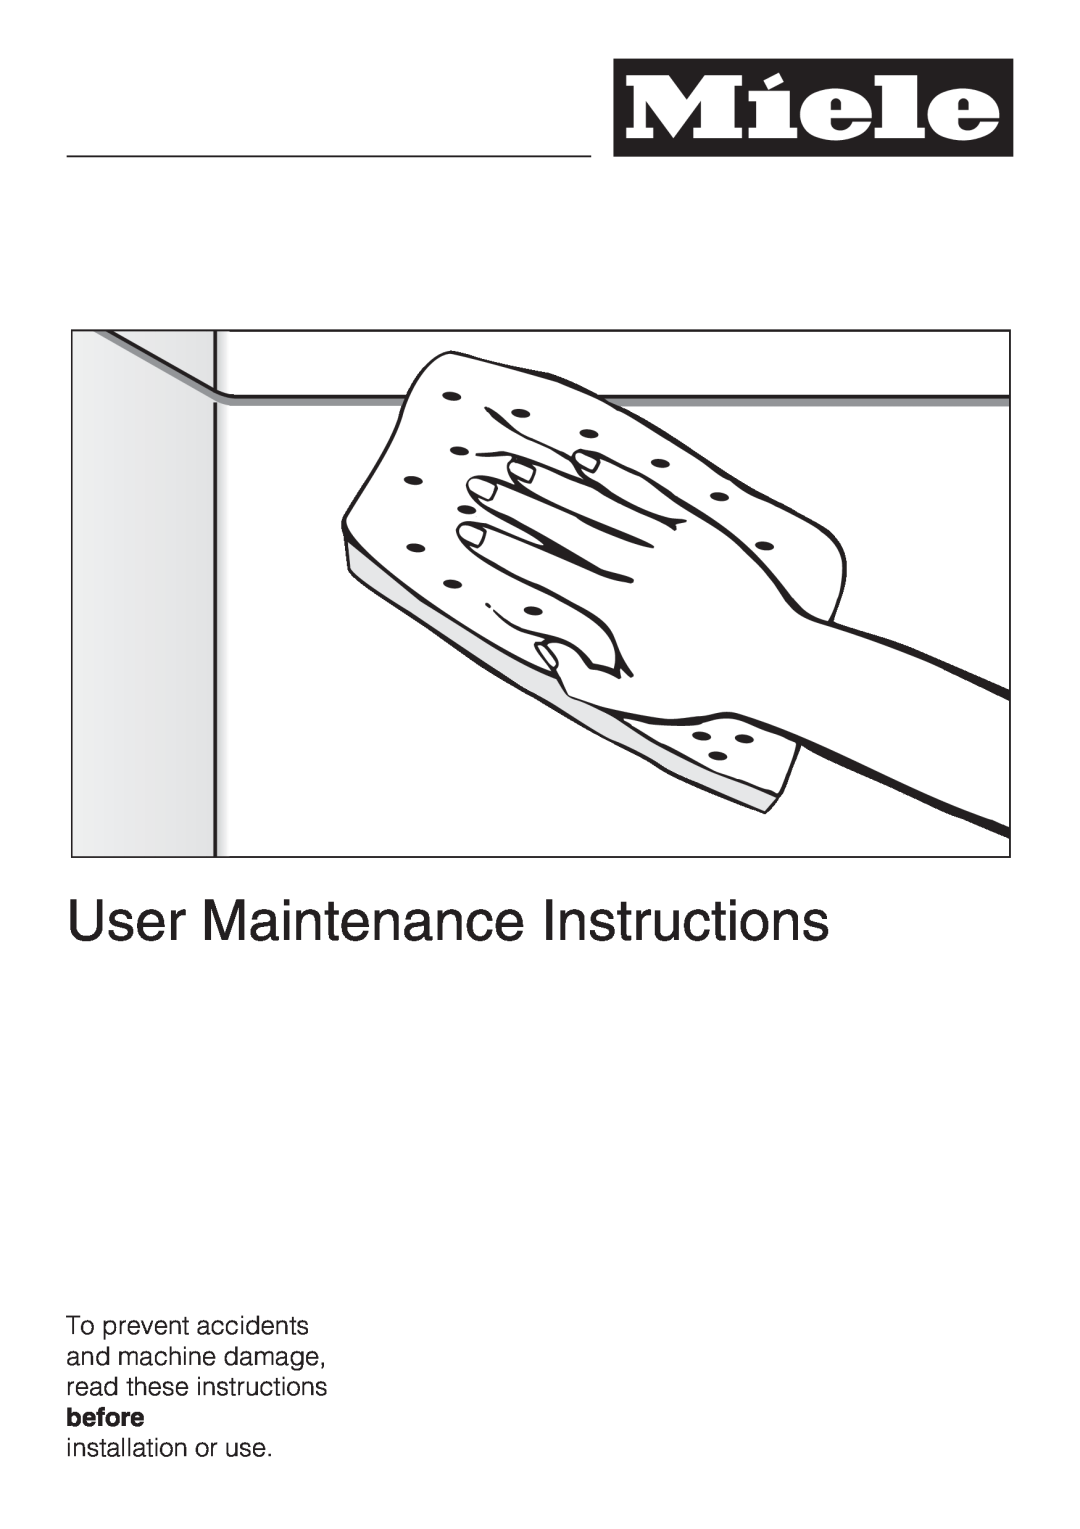 Miele G 5280, G 5285 manual User Maintenance Instructions, installation or use 